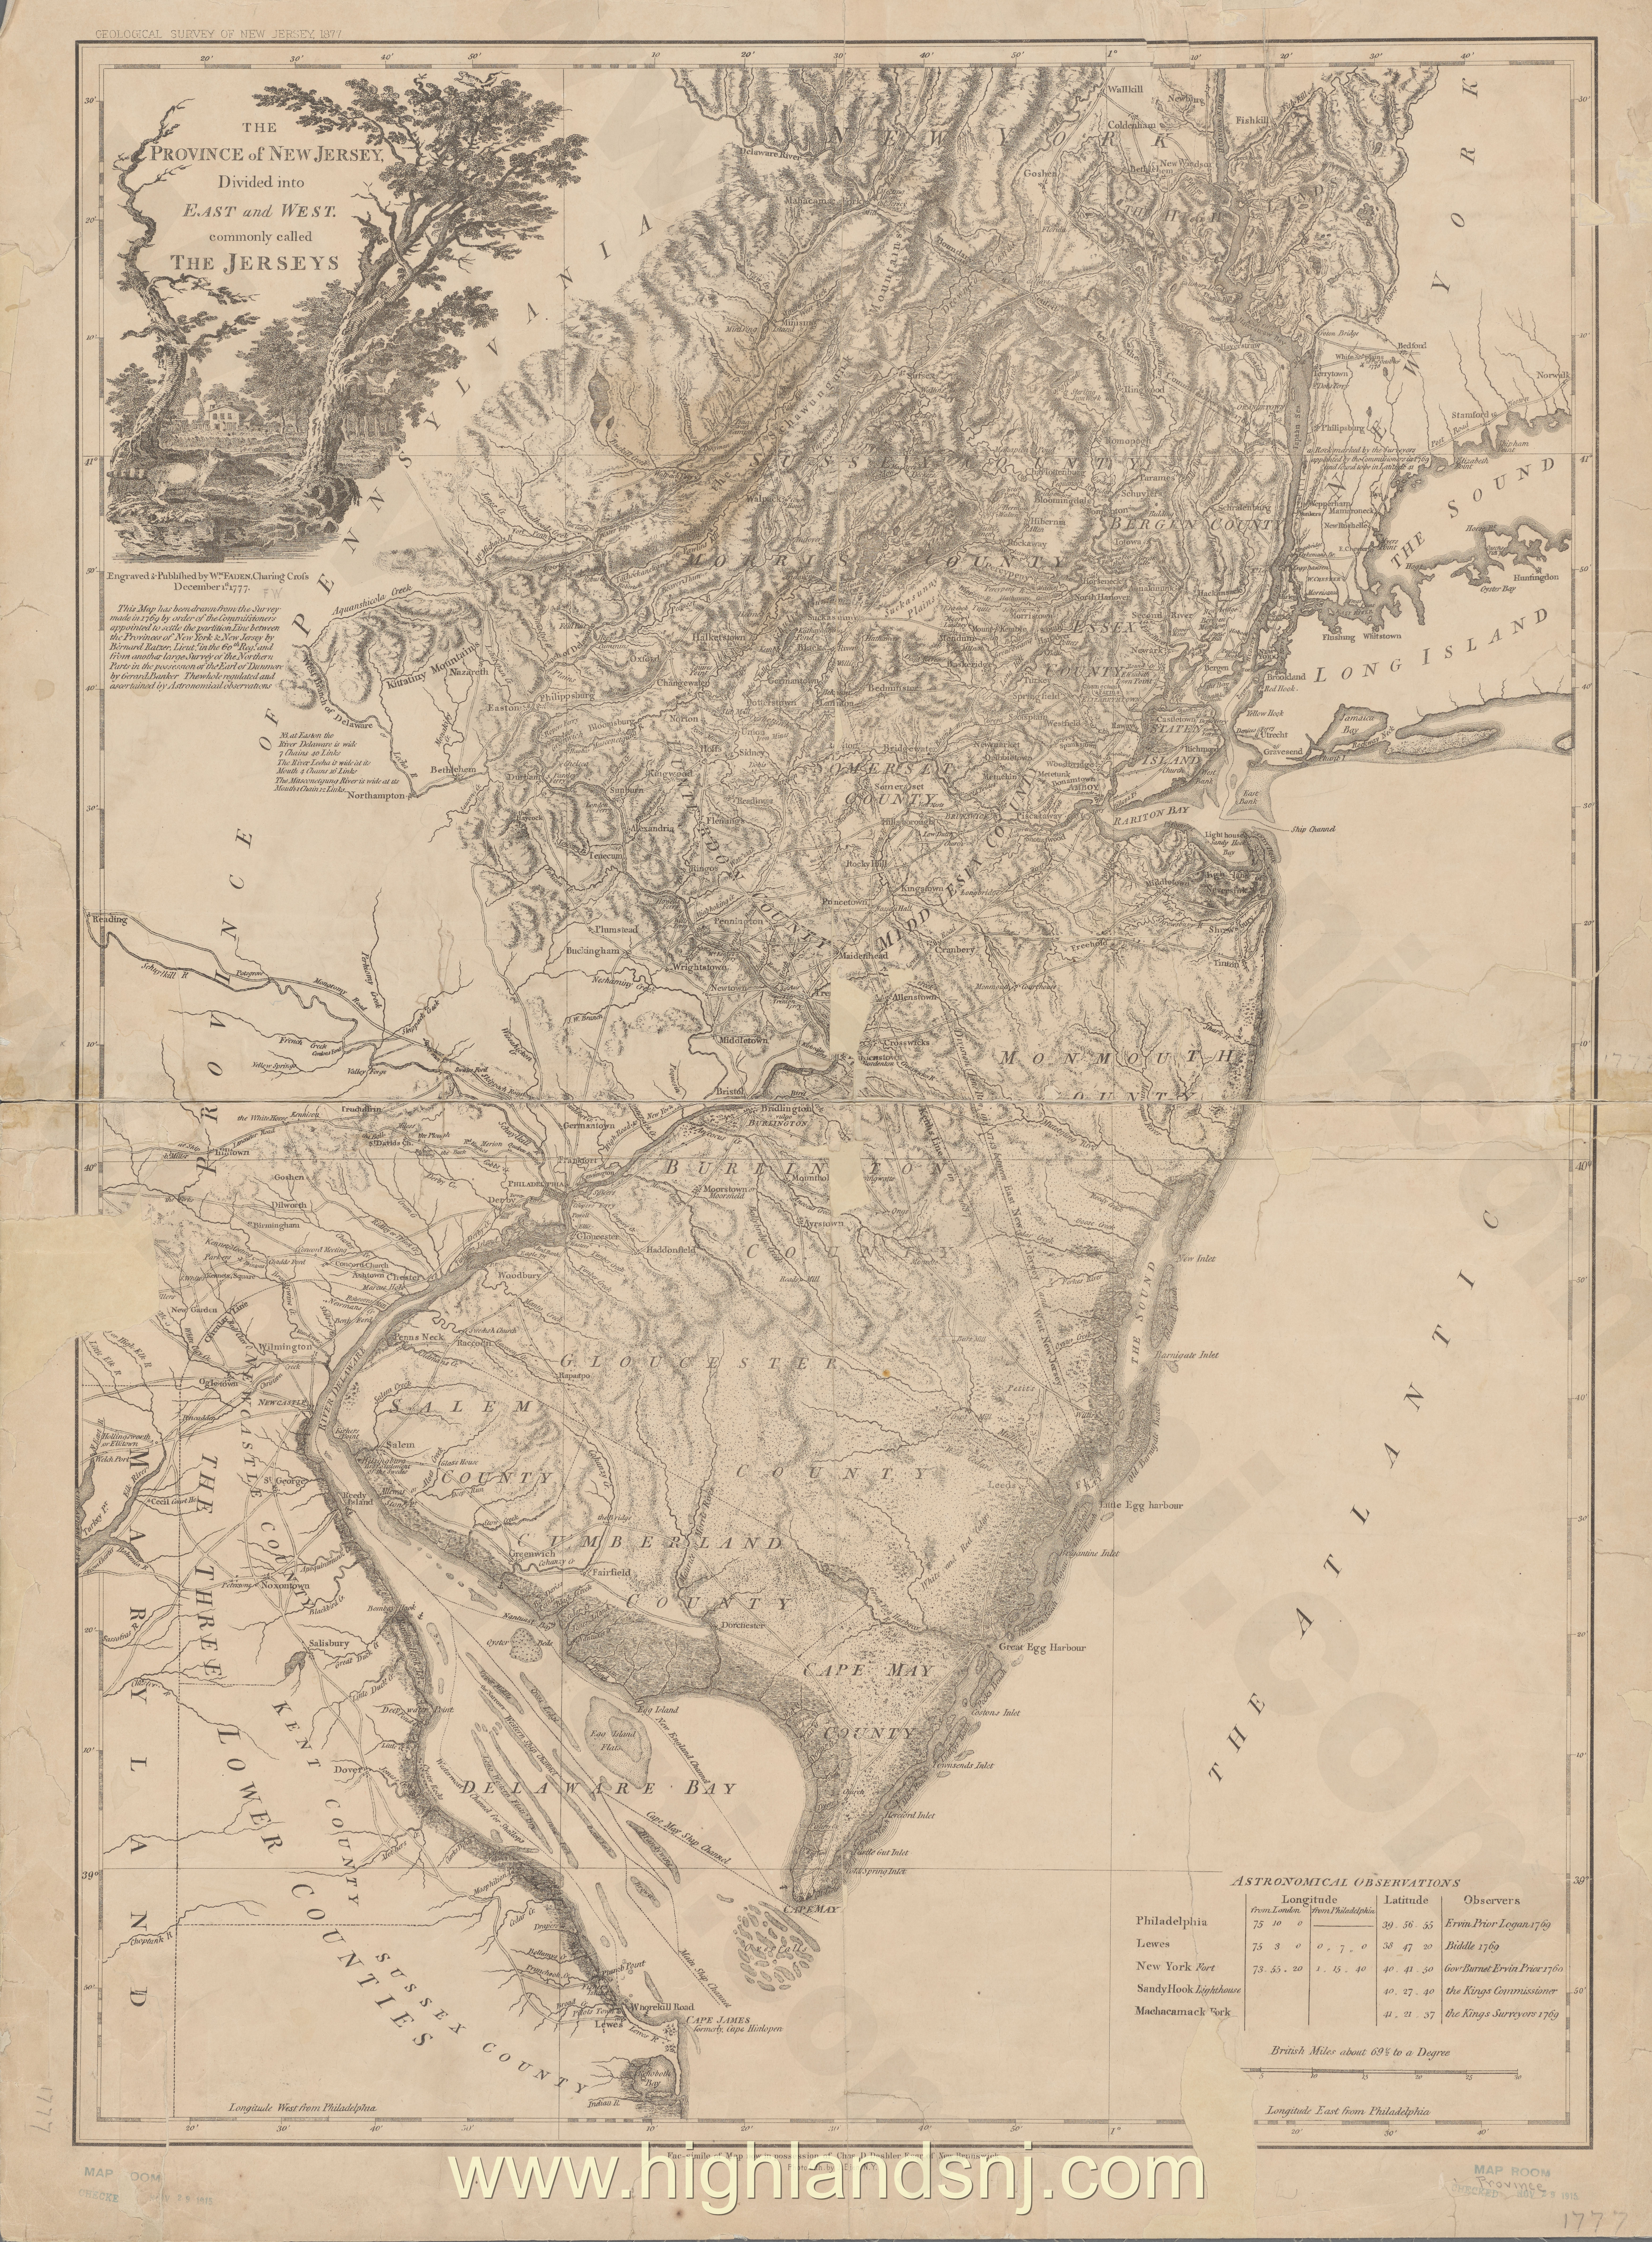 1777 The Province of New Jersey  divided into East and West commonly called the Jerseys nypldigitalcollections